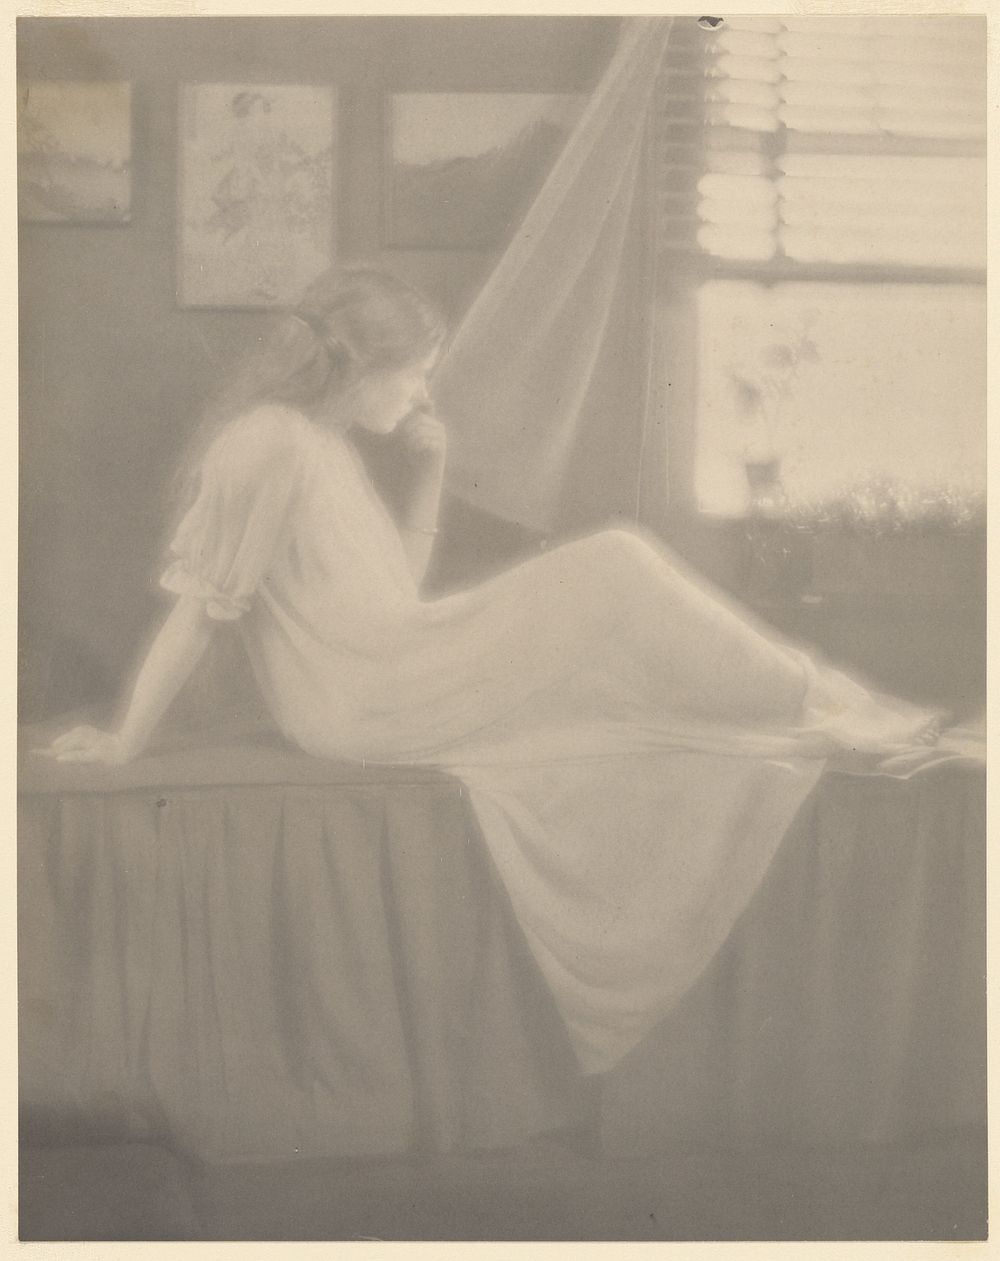 Potrait of a Woman Seated on a Bed Gazing Out a Window by Paul B Haviland